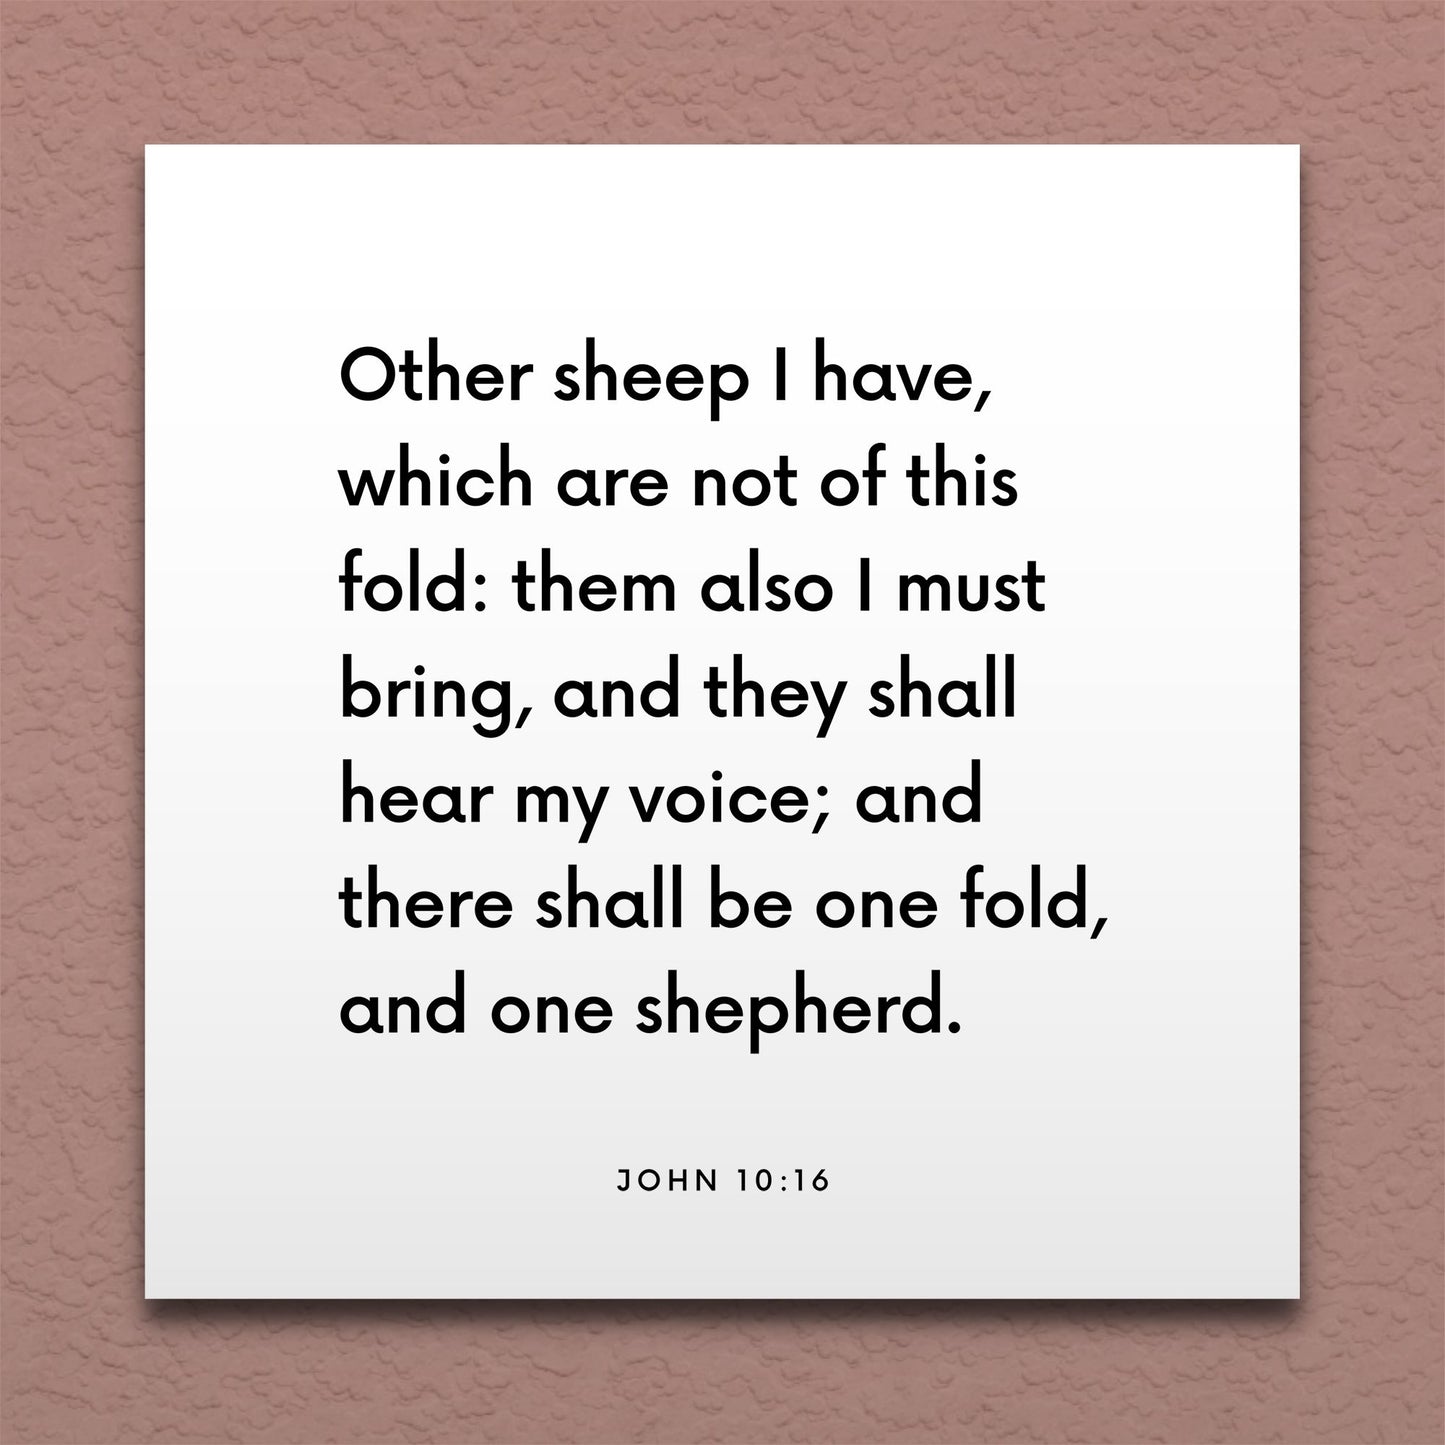 Wall-mounted scripture tile for John 10:16 - "Other sheep I have, which are not of this fold"